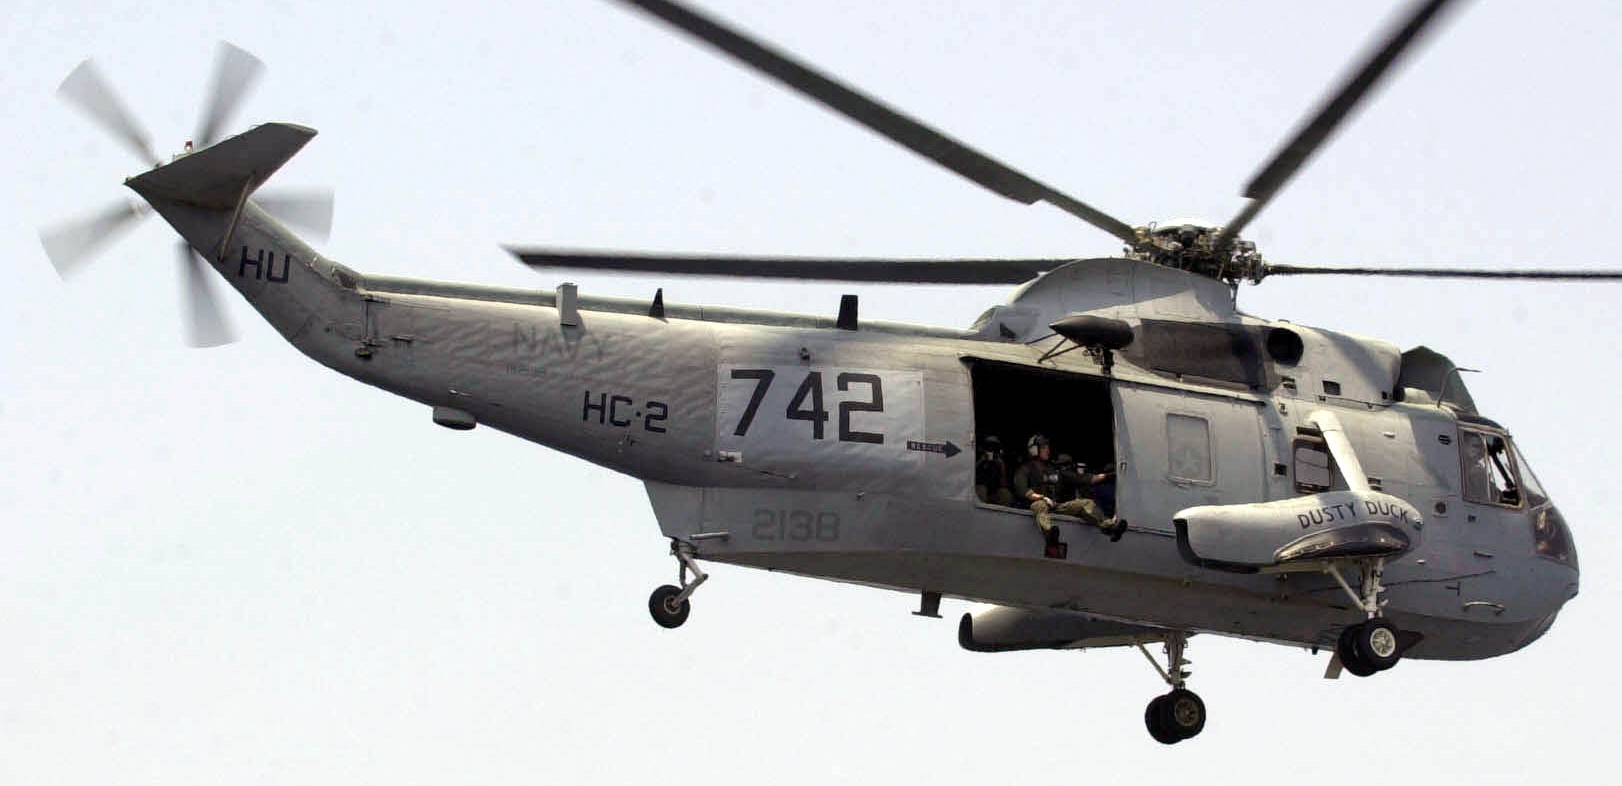 hc-2 fleet angels helicopter combat support squadron us navy sh-3 Sea King CH-53 Super Stallion 15x